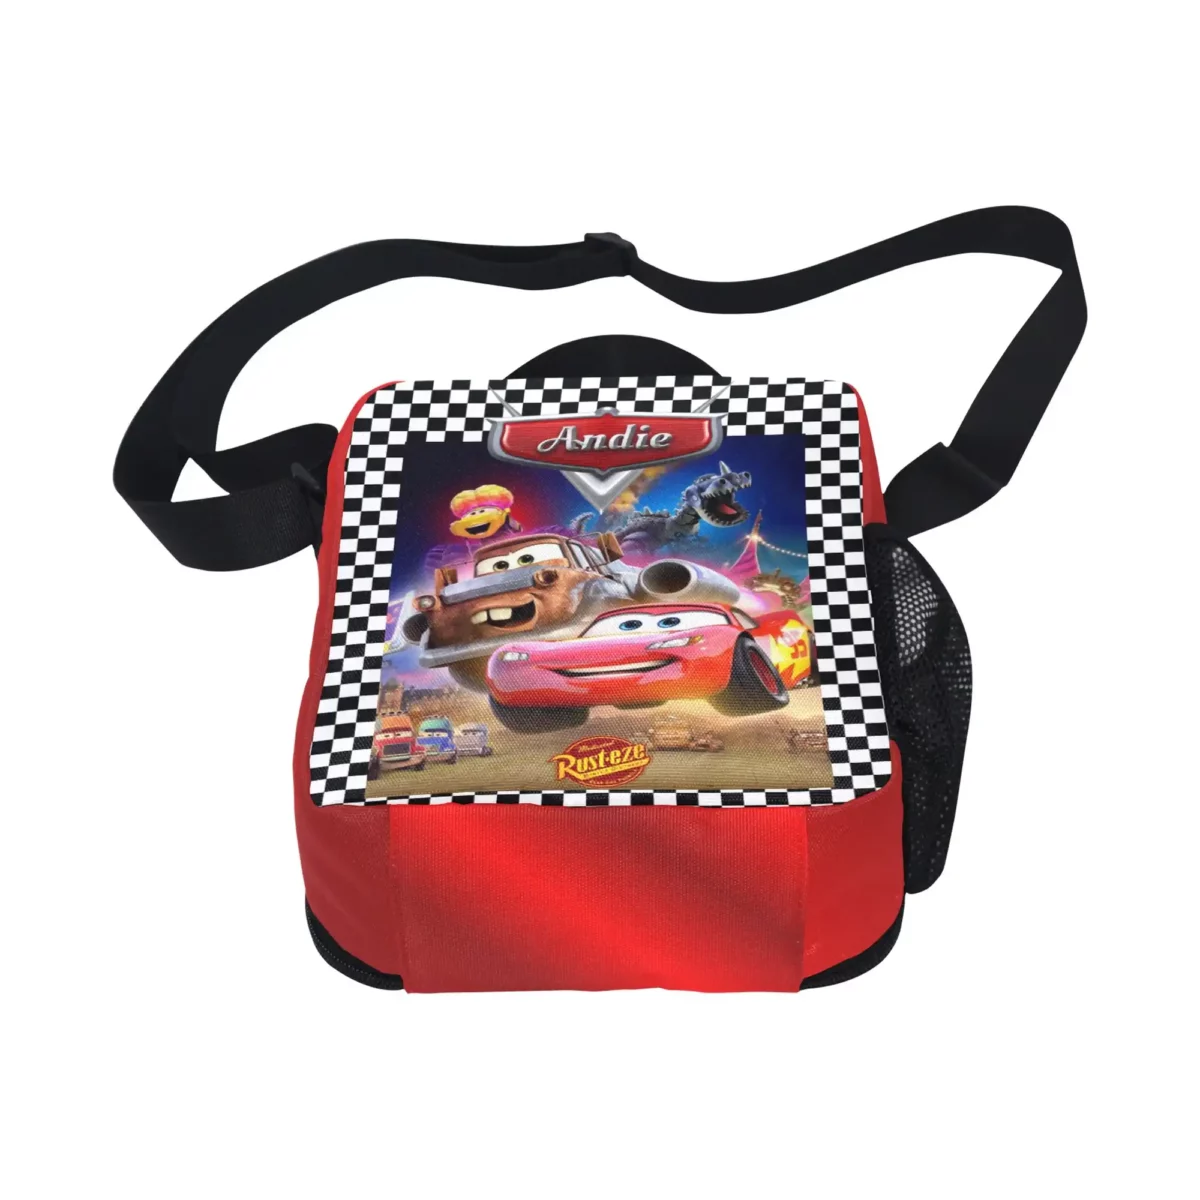 Personalized Lightning McQueen Lunch Bag for kids. Insulated interior Lunchbox from Cars Cartoon Cool Kiddo 14